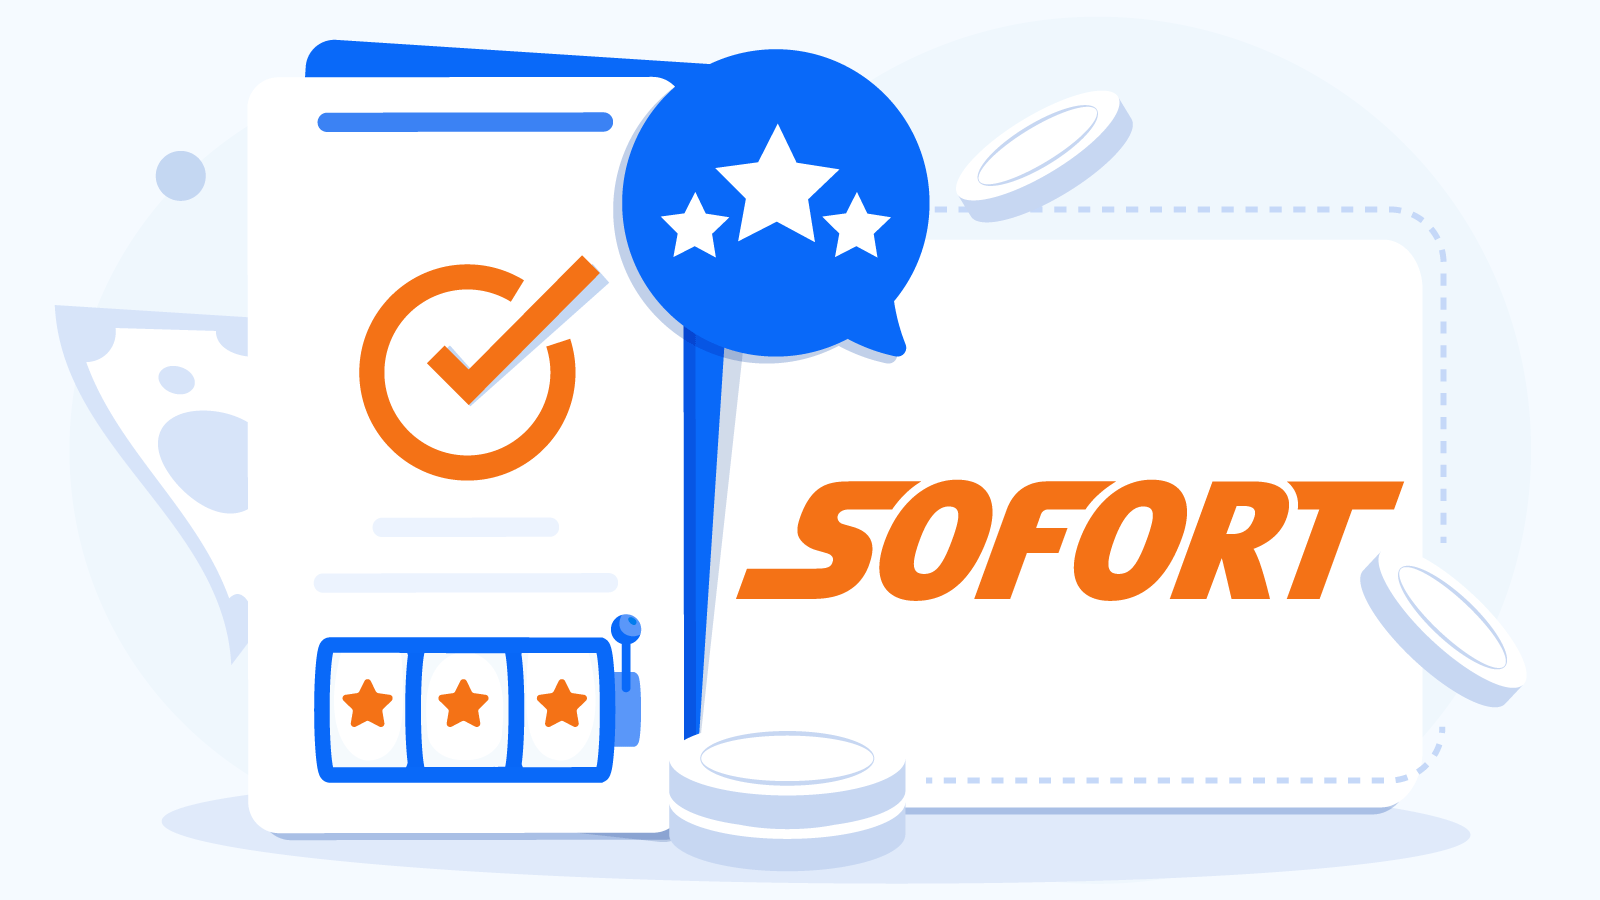 Sofort as a Payment Provider In-Depth Review